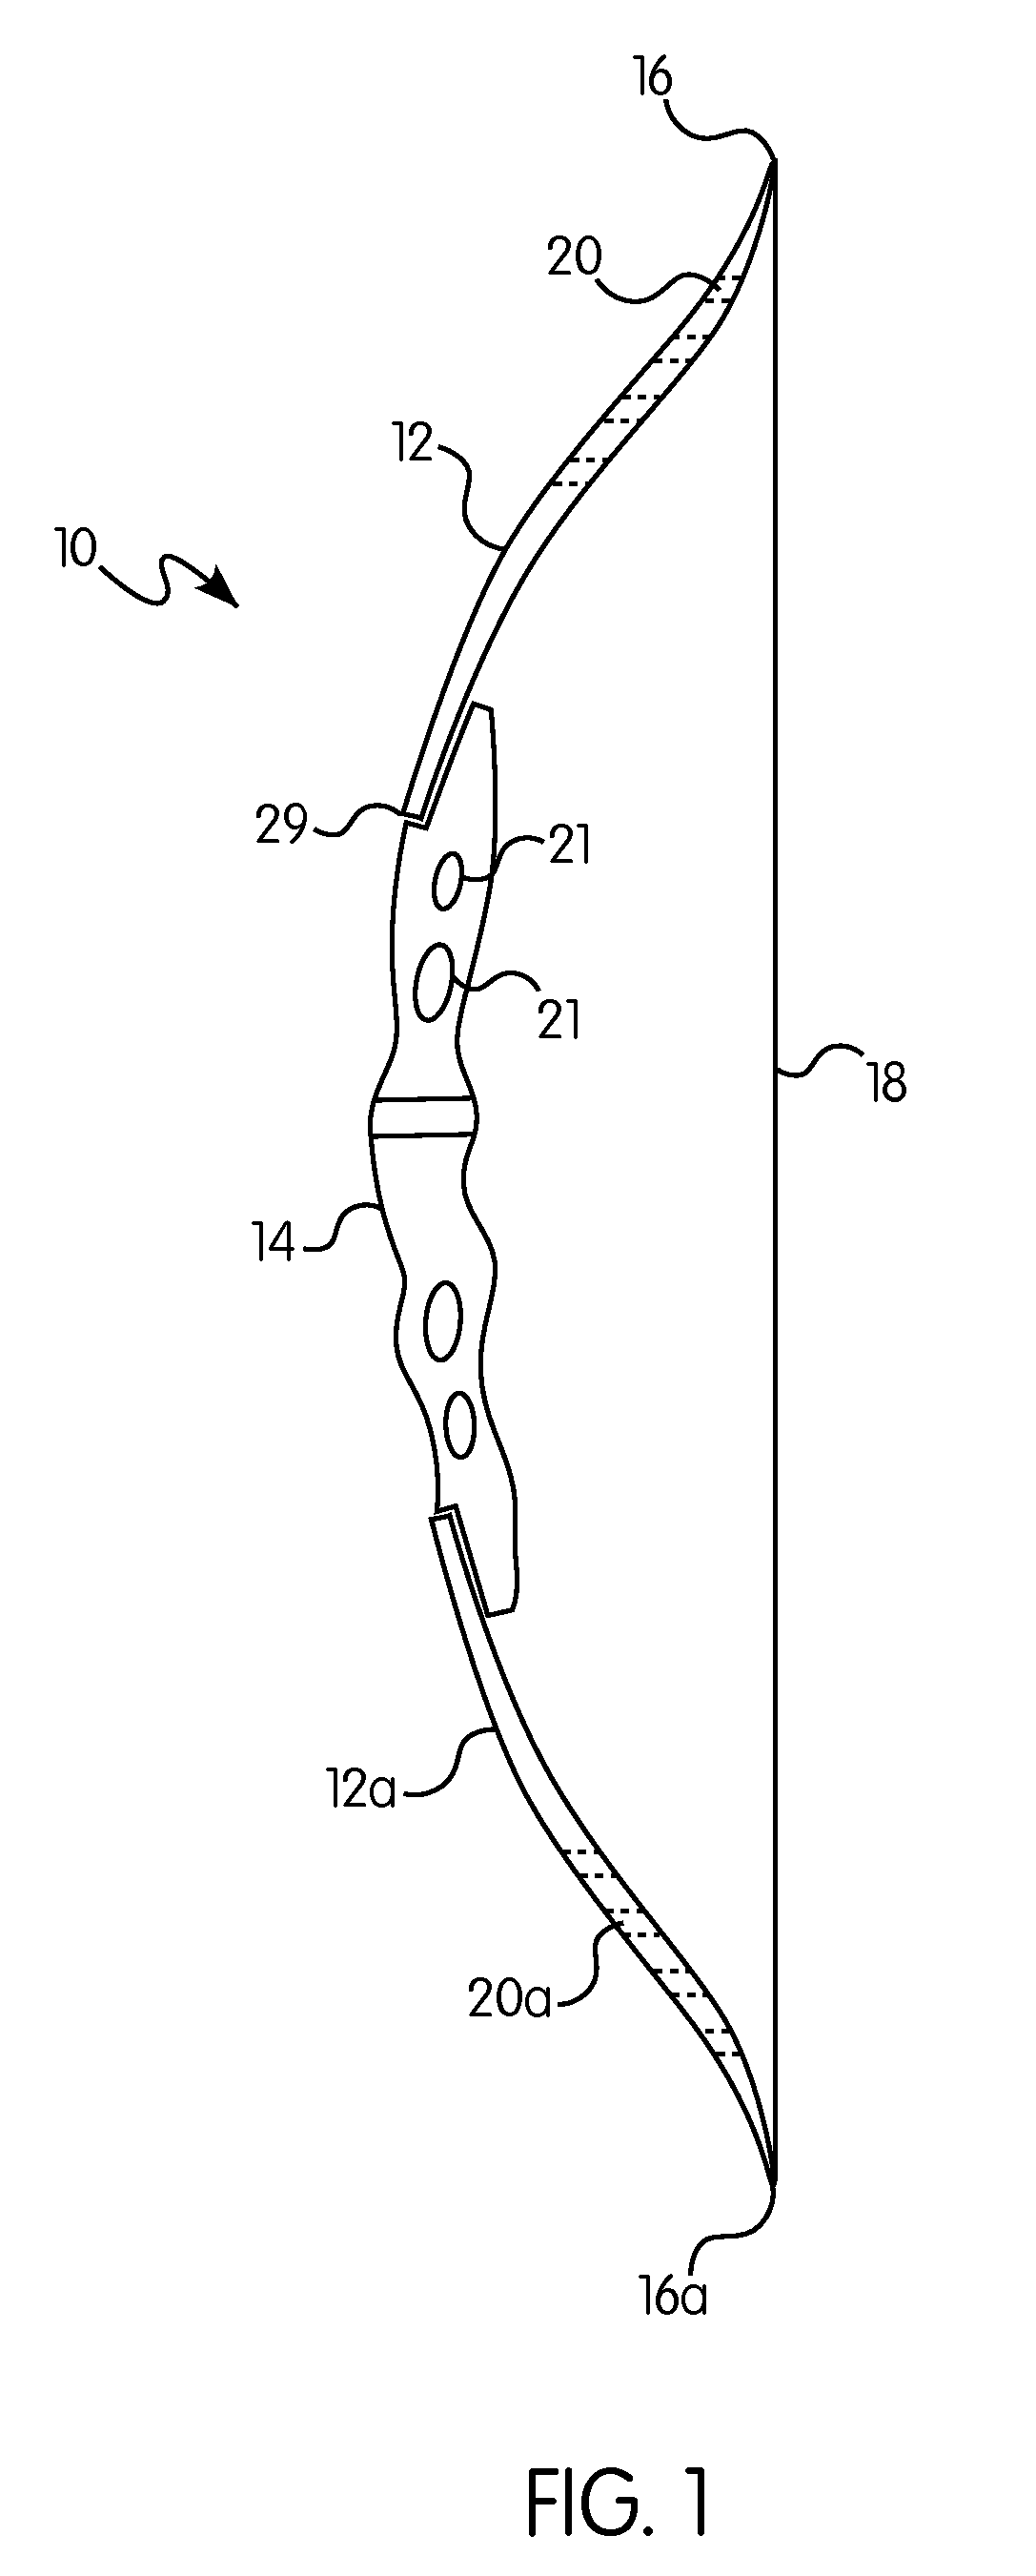 Archery bow having a multiple-tube structure